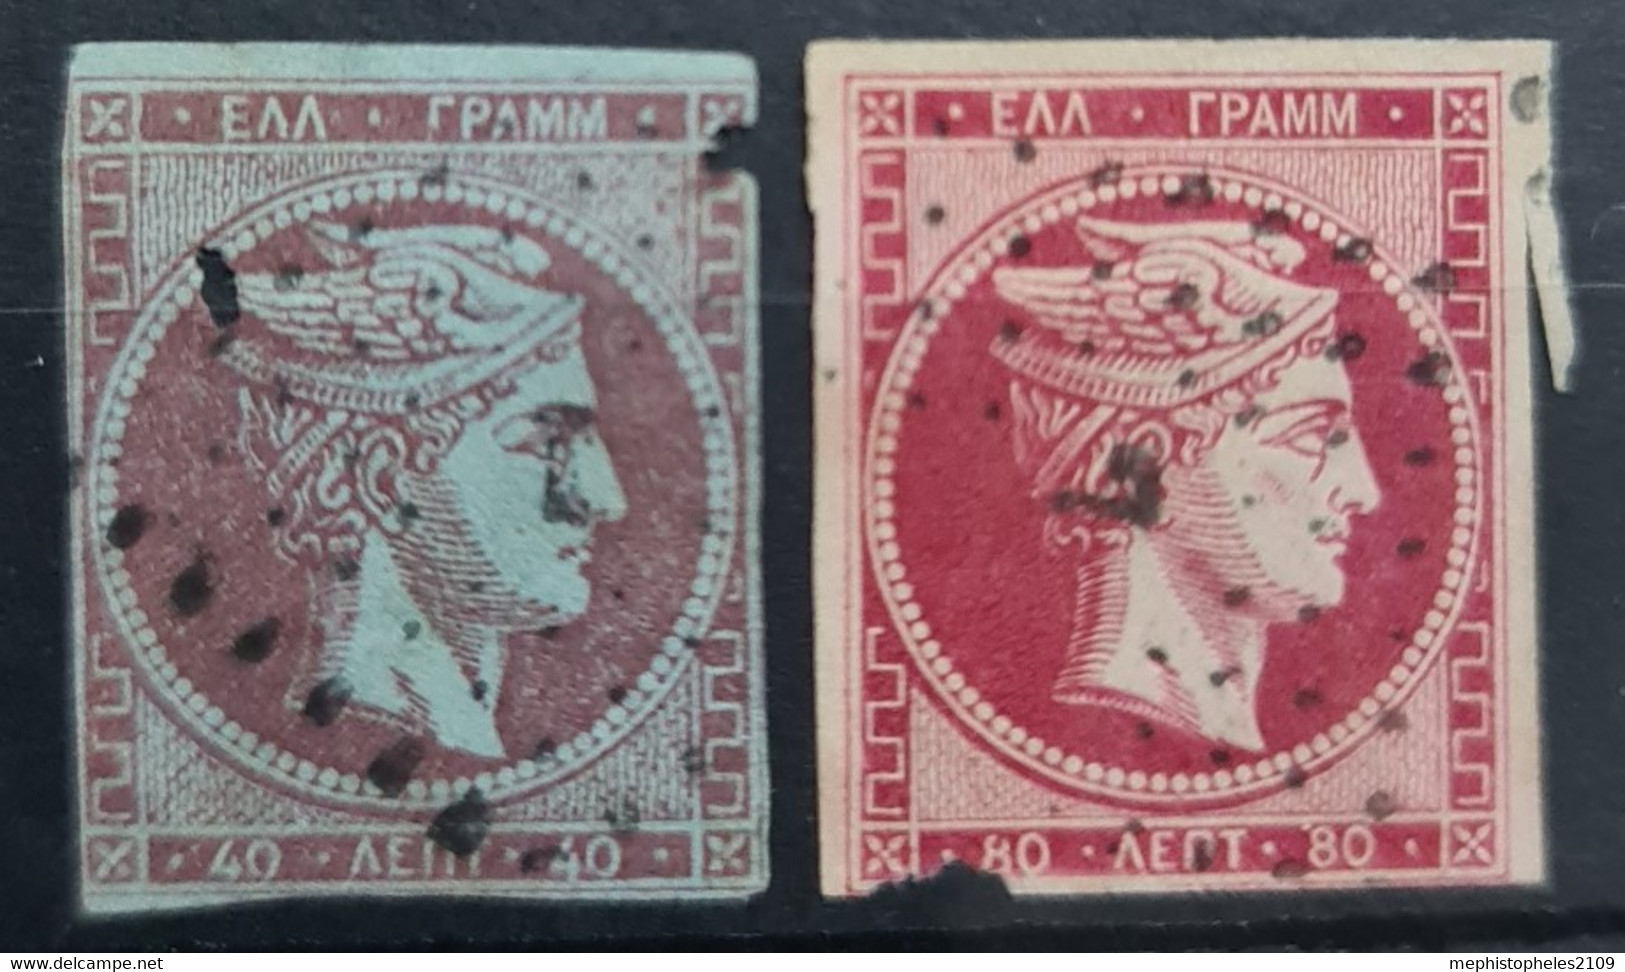 GREECE 1862 - Canceled - Sc# 14, 15 - Defects! - Used Stamps